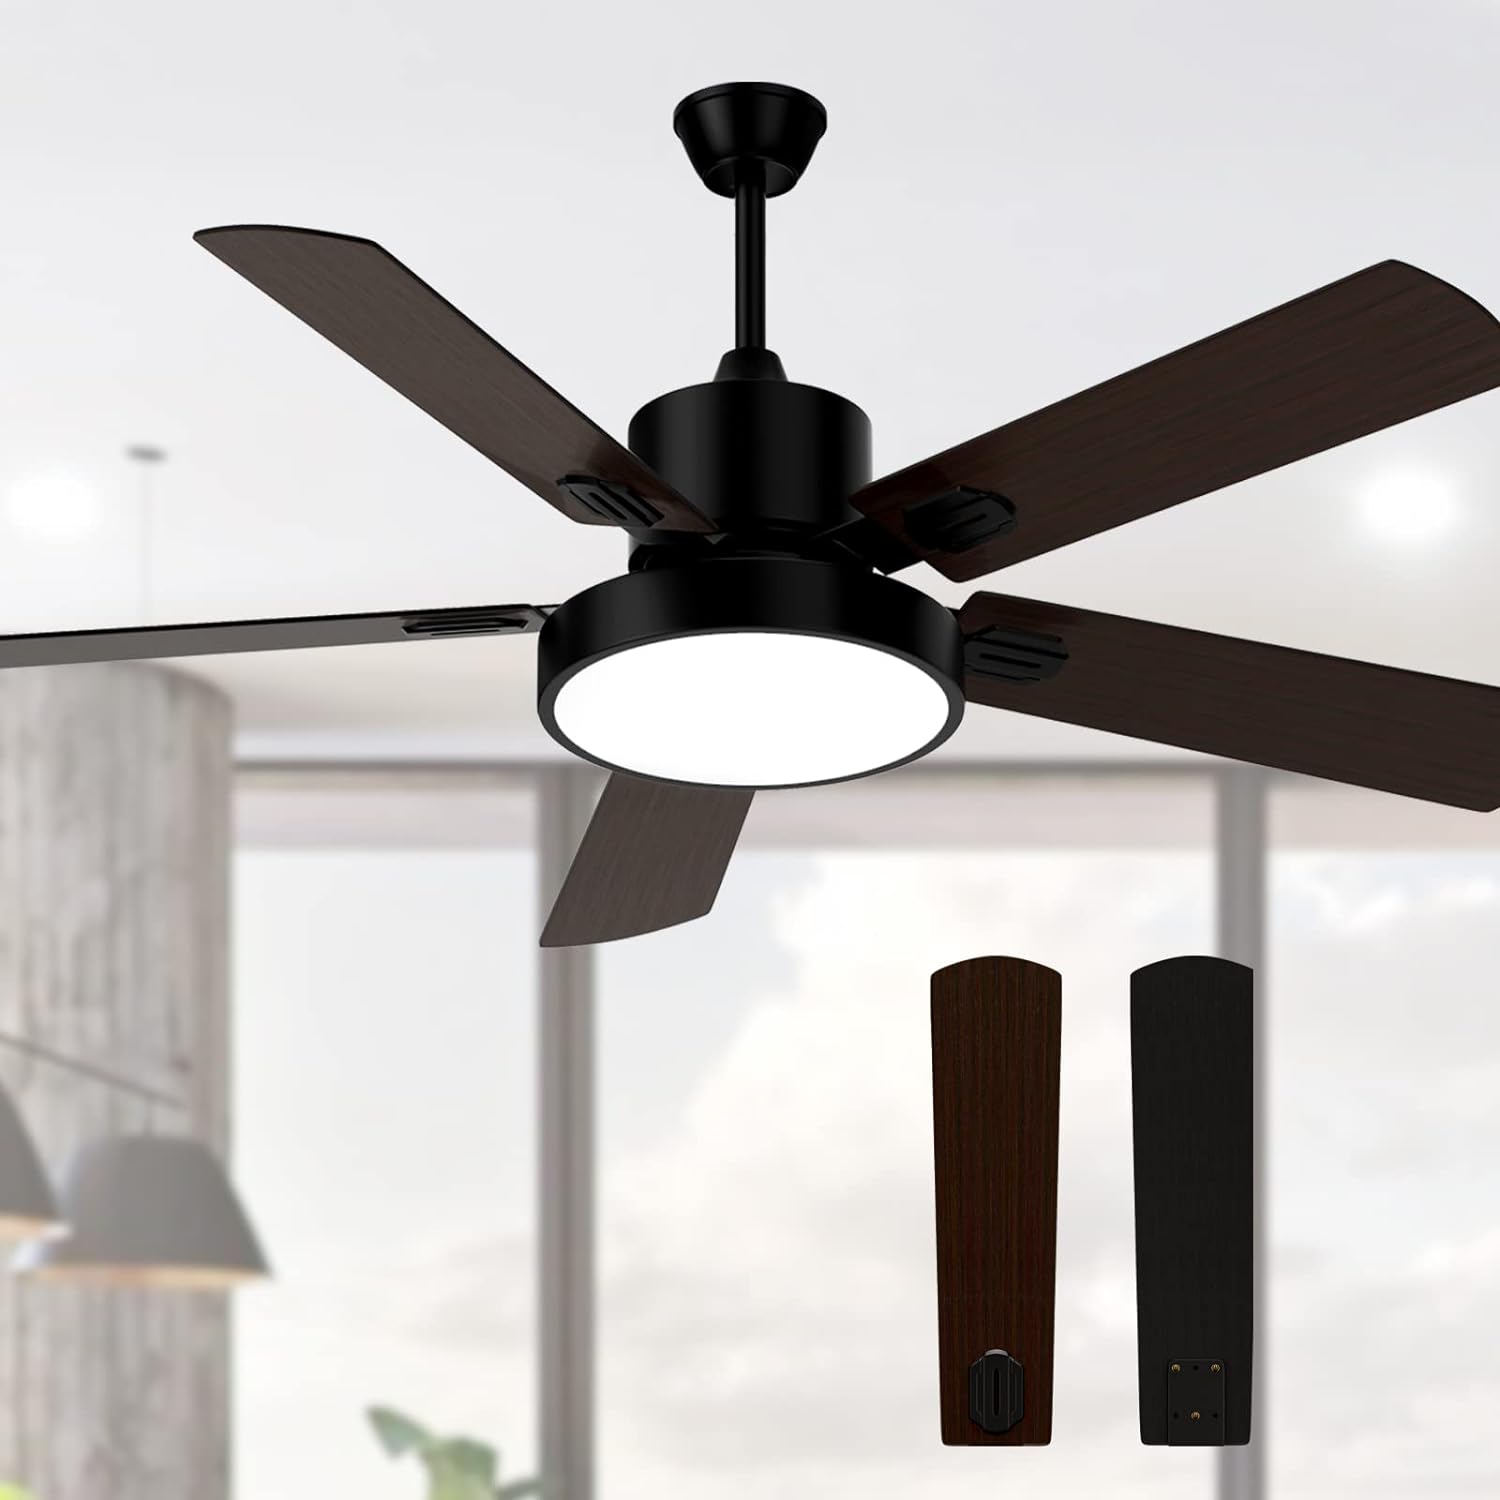 Flash Sale Alert: Save Big on Obabala Ceiling Fan with Light, 52-Inch - Limited-Time Specials!